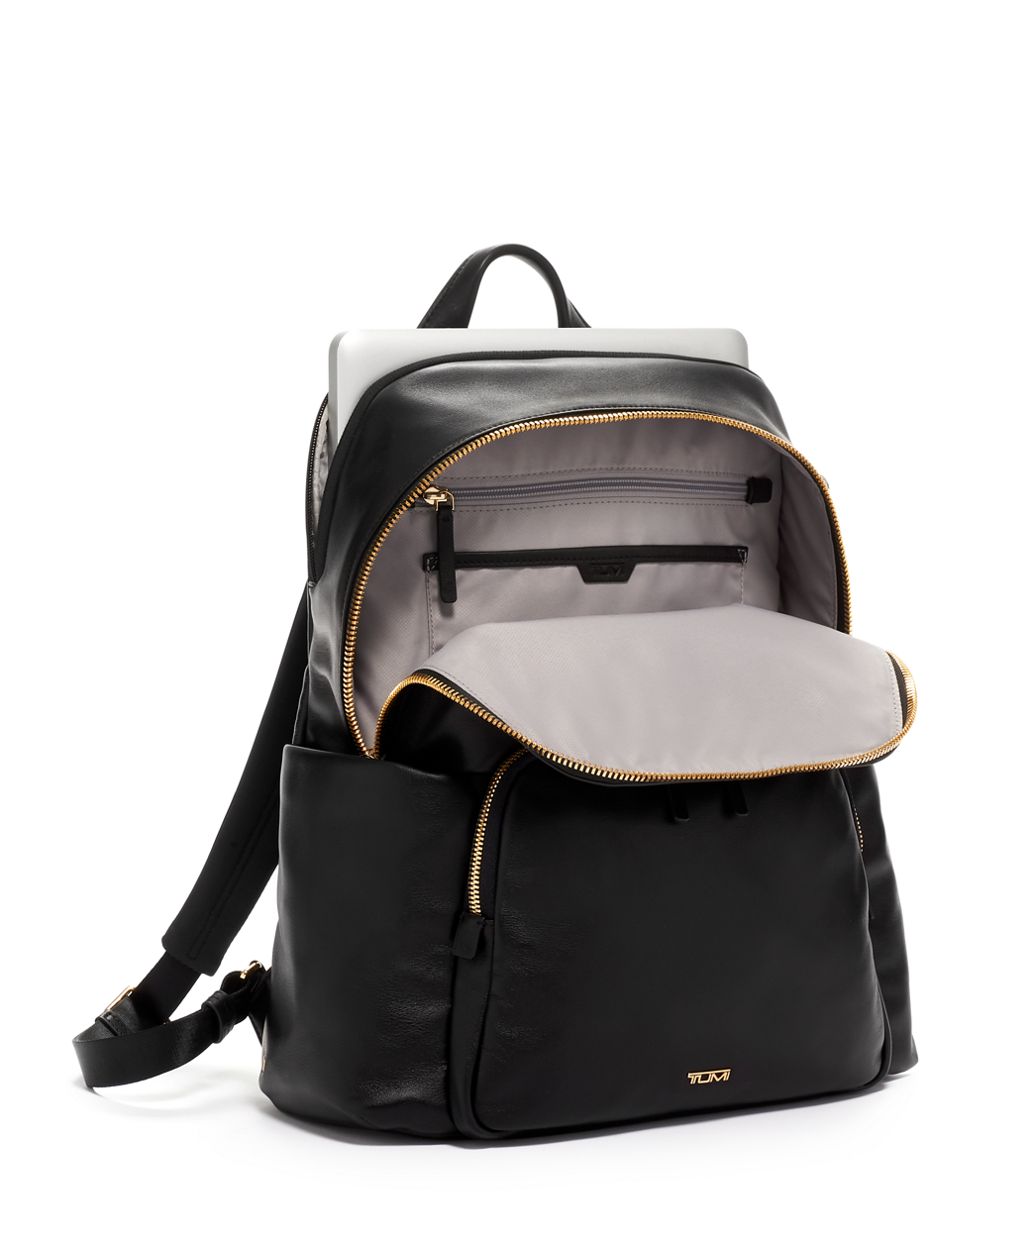 Classic Brown Leather Backpack For Work or College